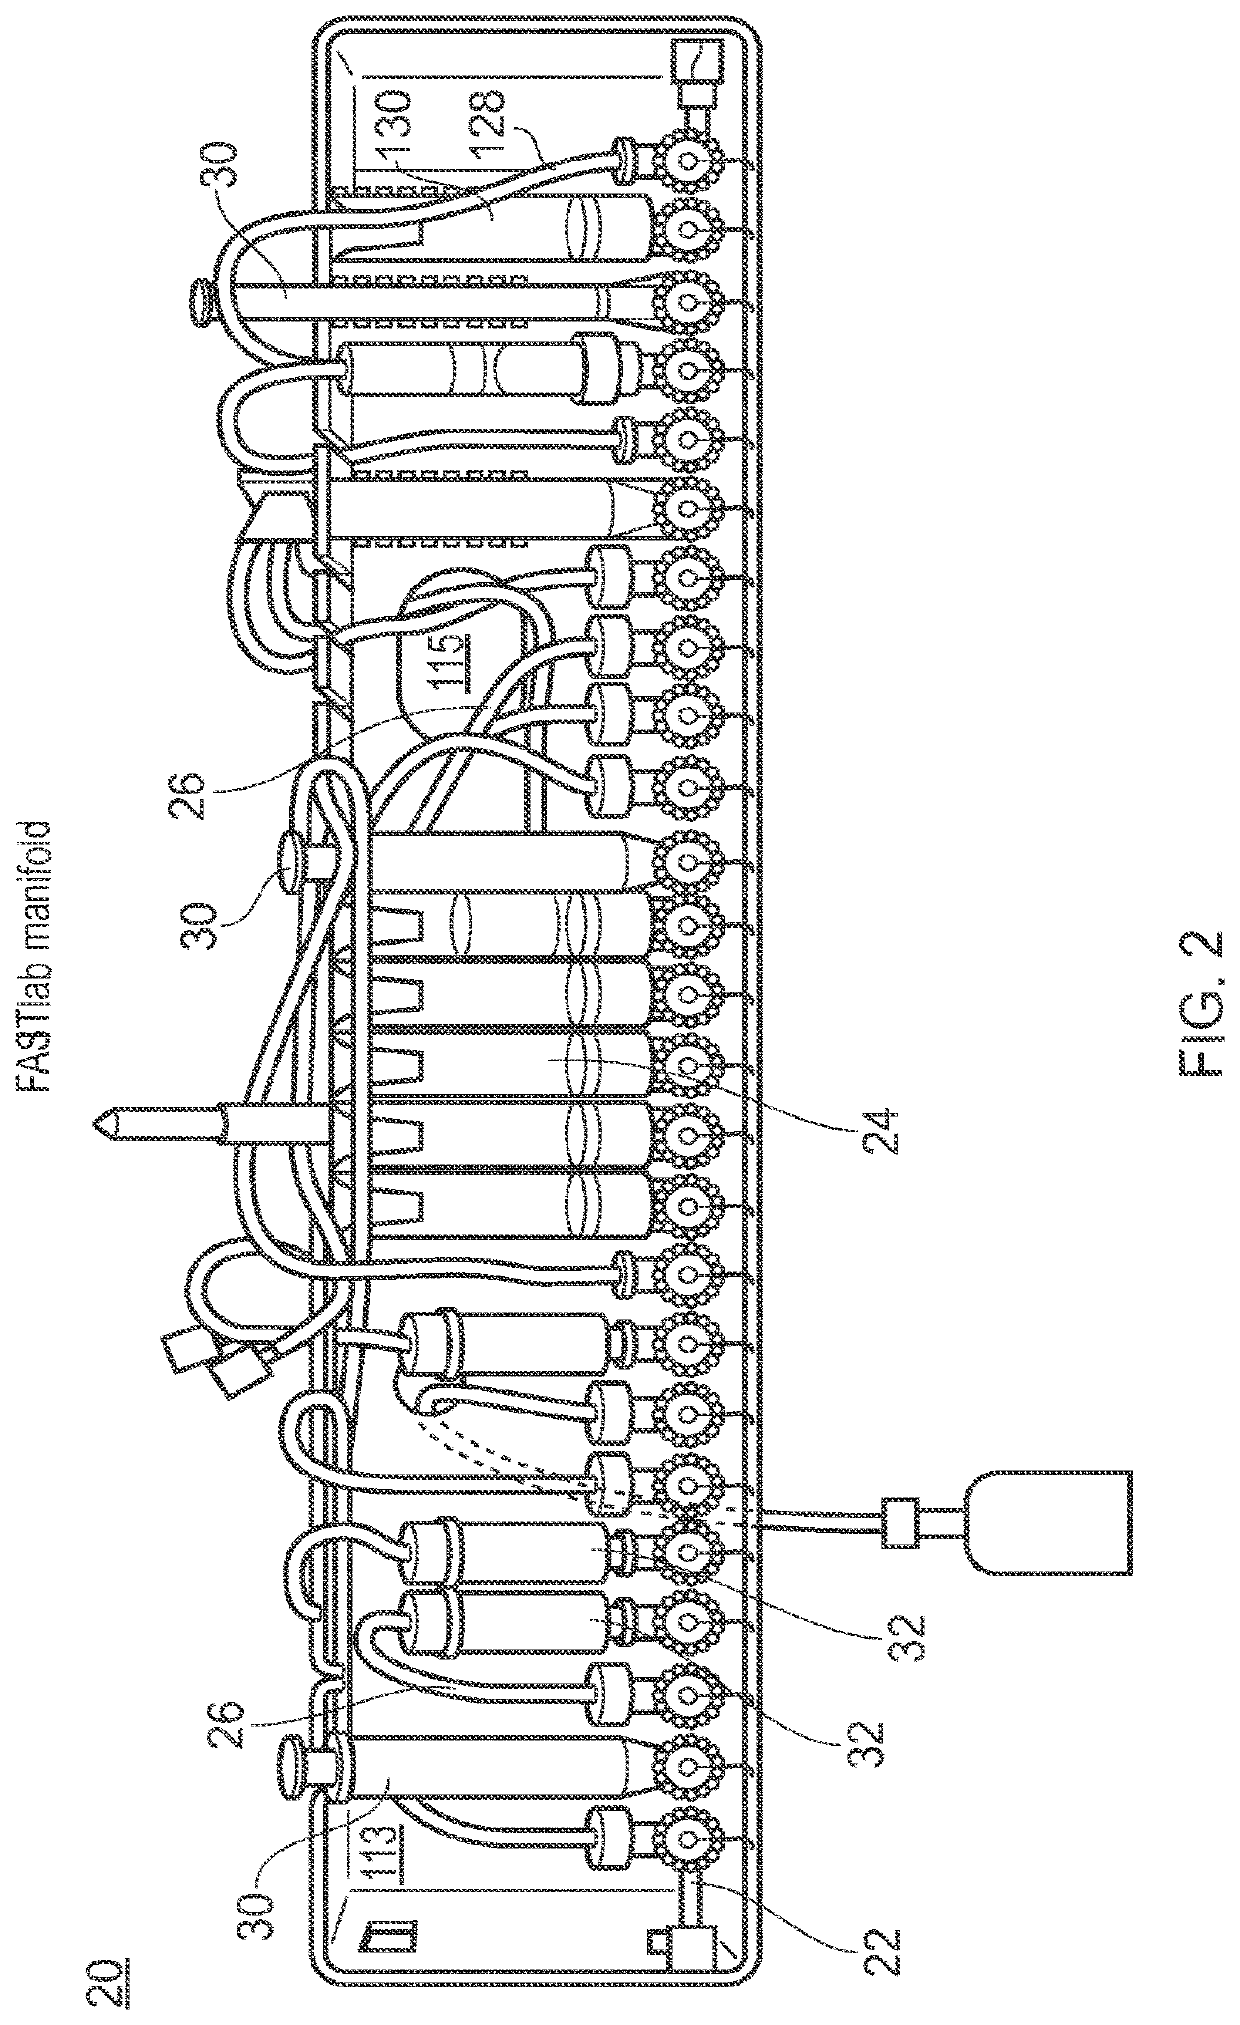 Valve Manifolds for Simulated Moving Bed Chromatography